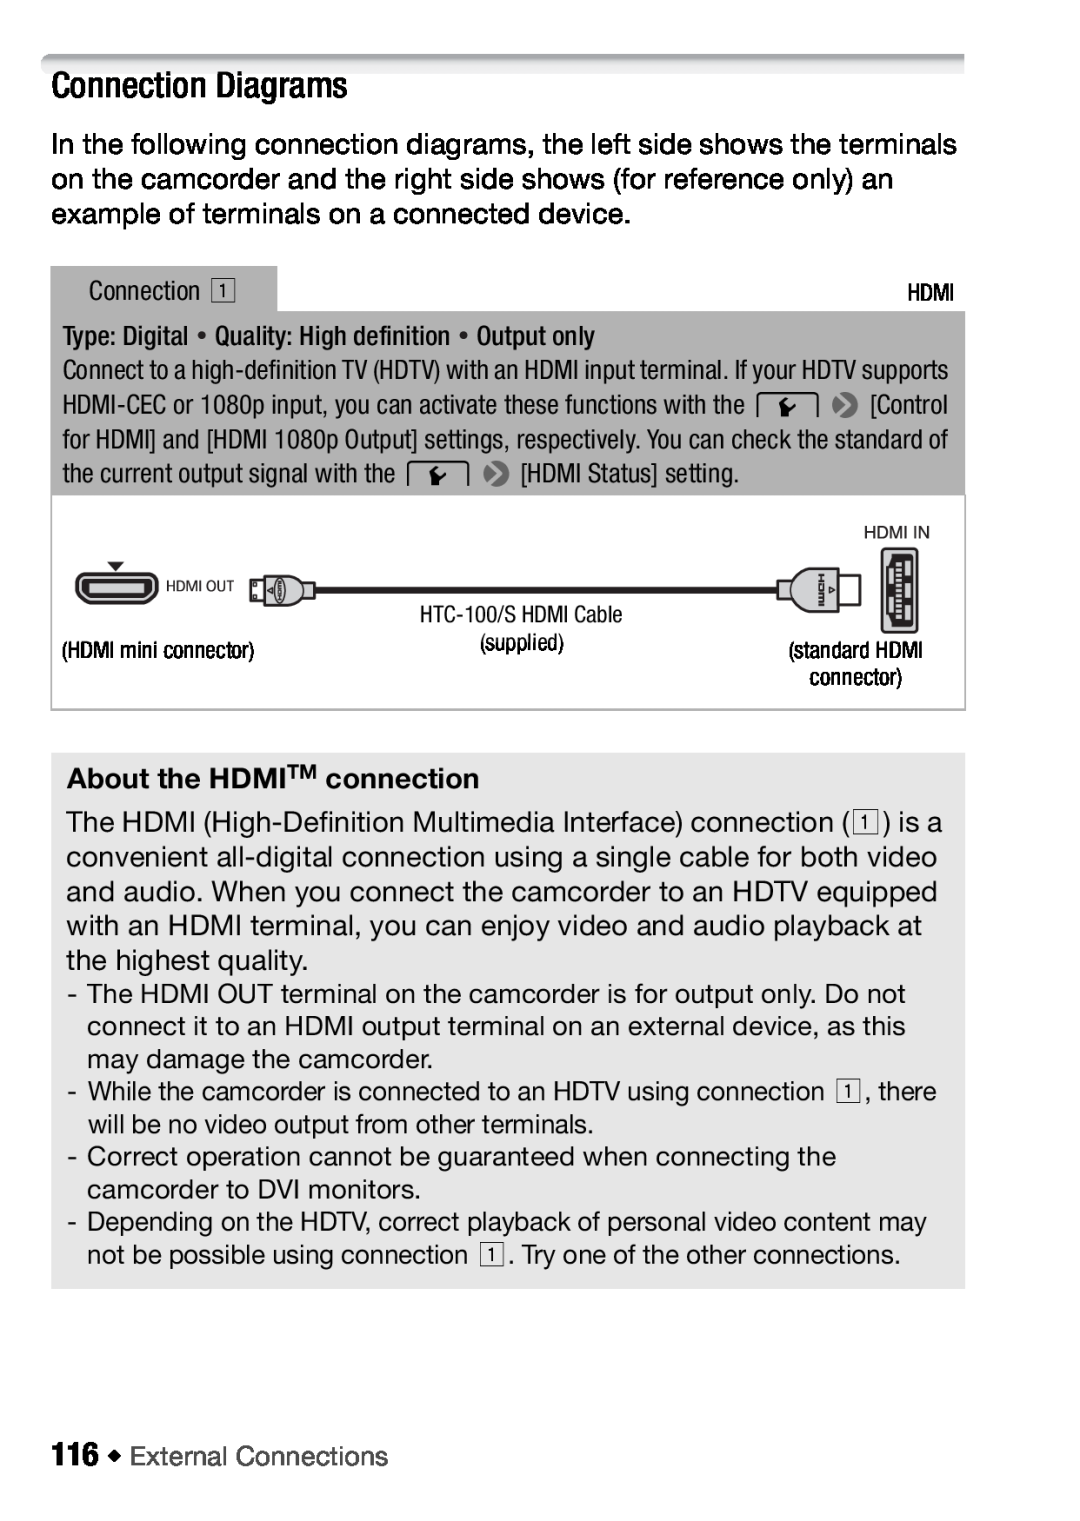 Canon HFM406, HFM46 instruction manual Connection Diagrams, About the HDMITM connection 